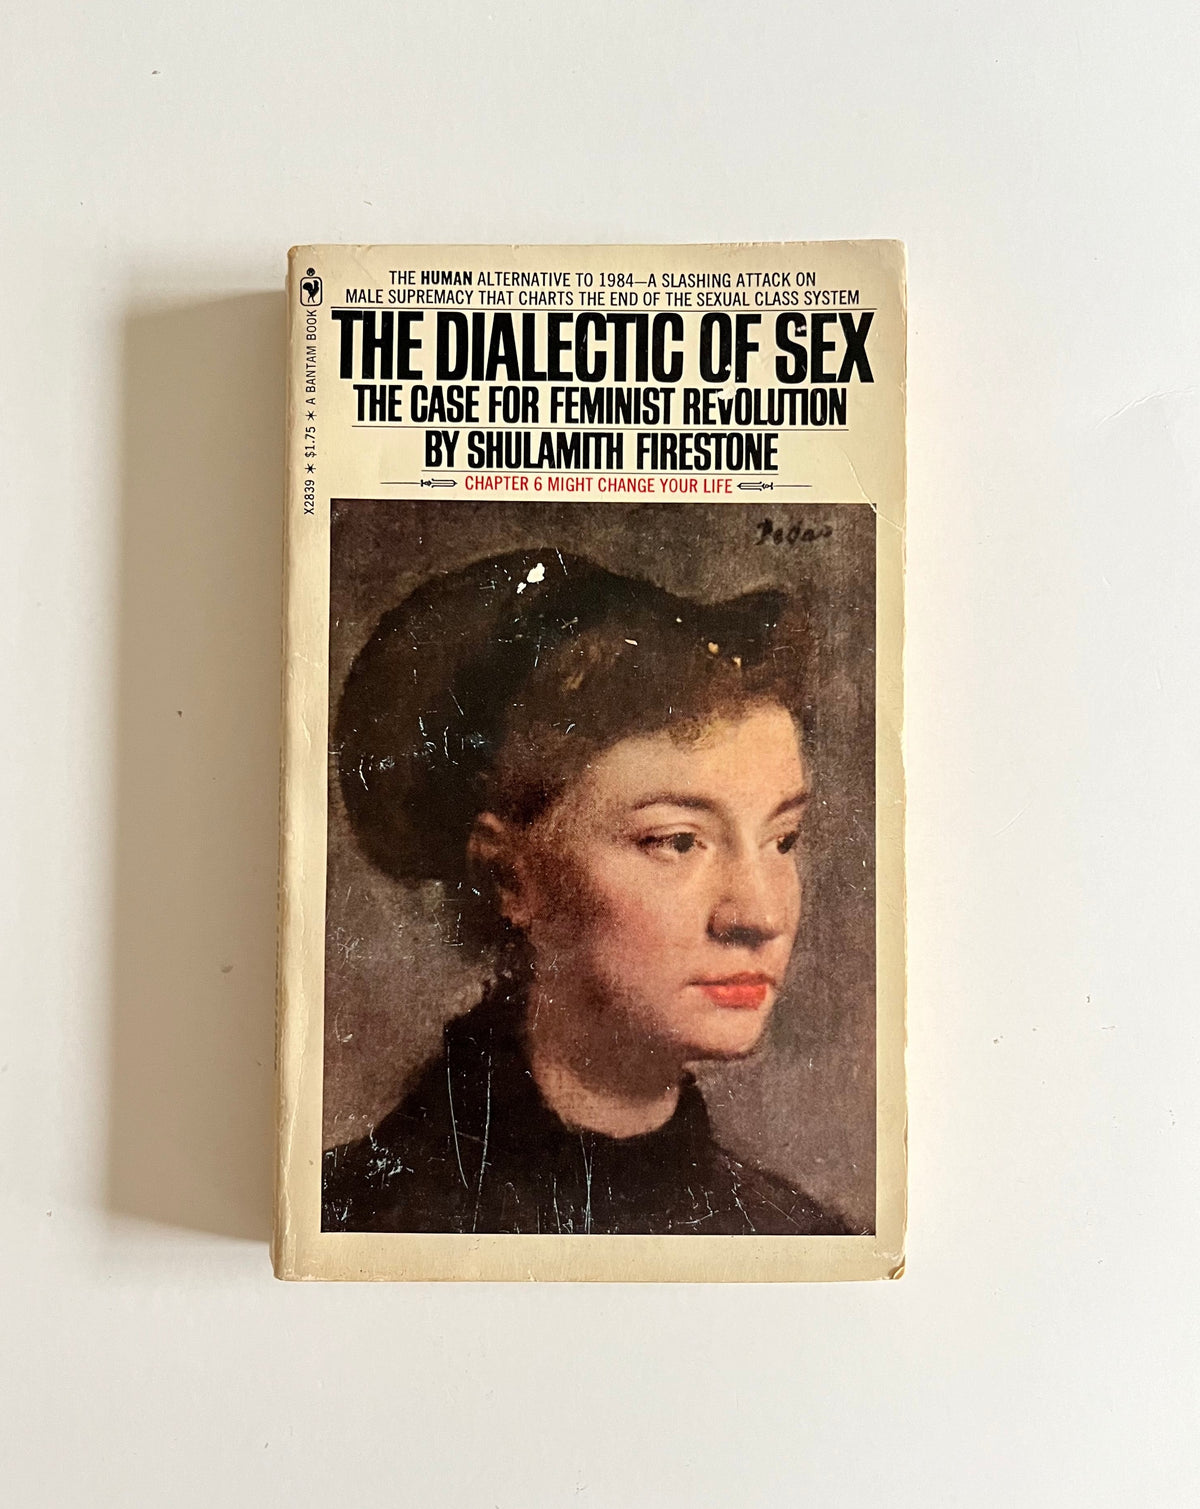 The Dialect of Sex: The Case for Feminist Revolution by Shulamith Firestone